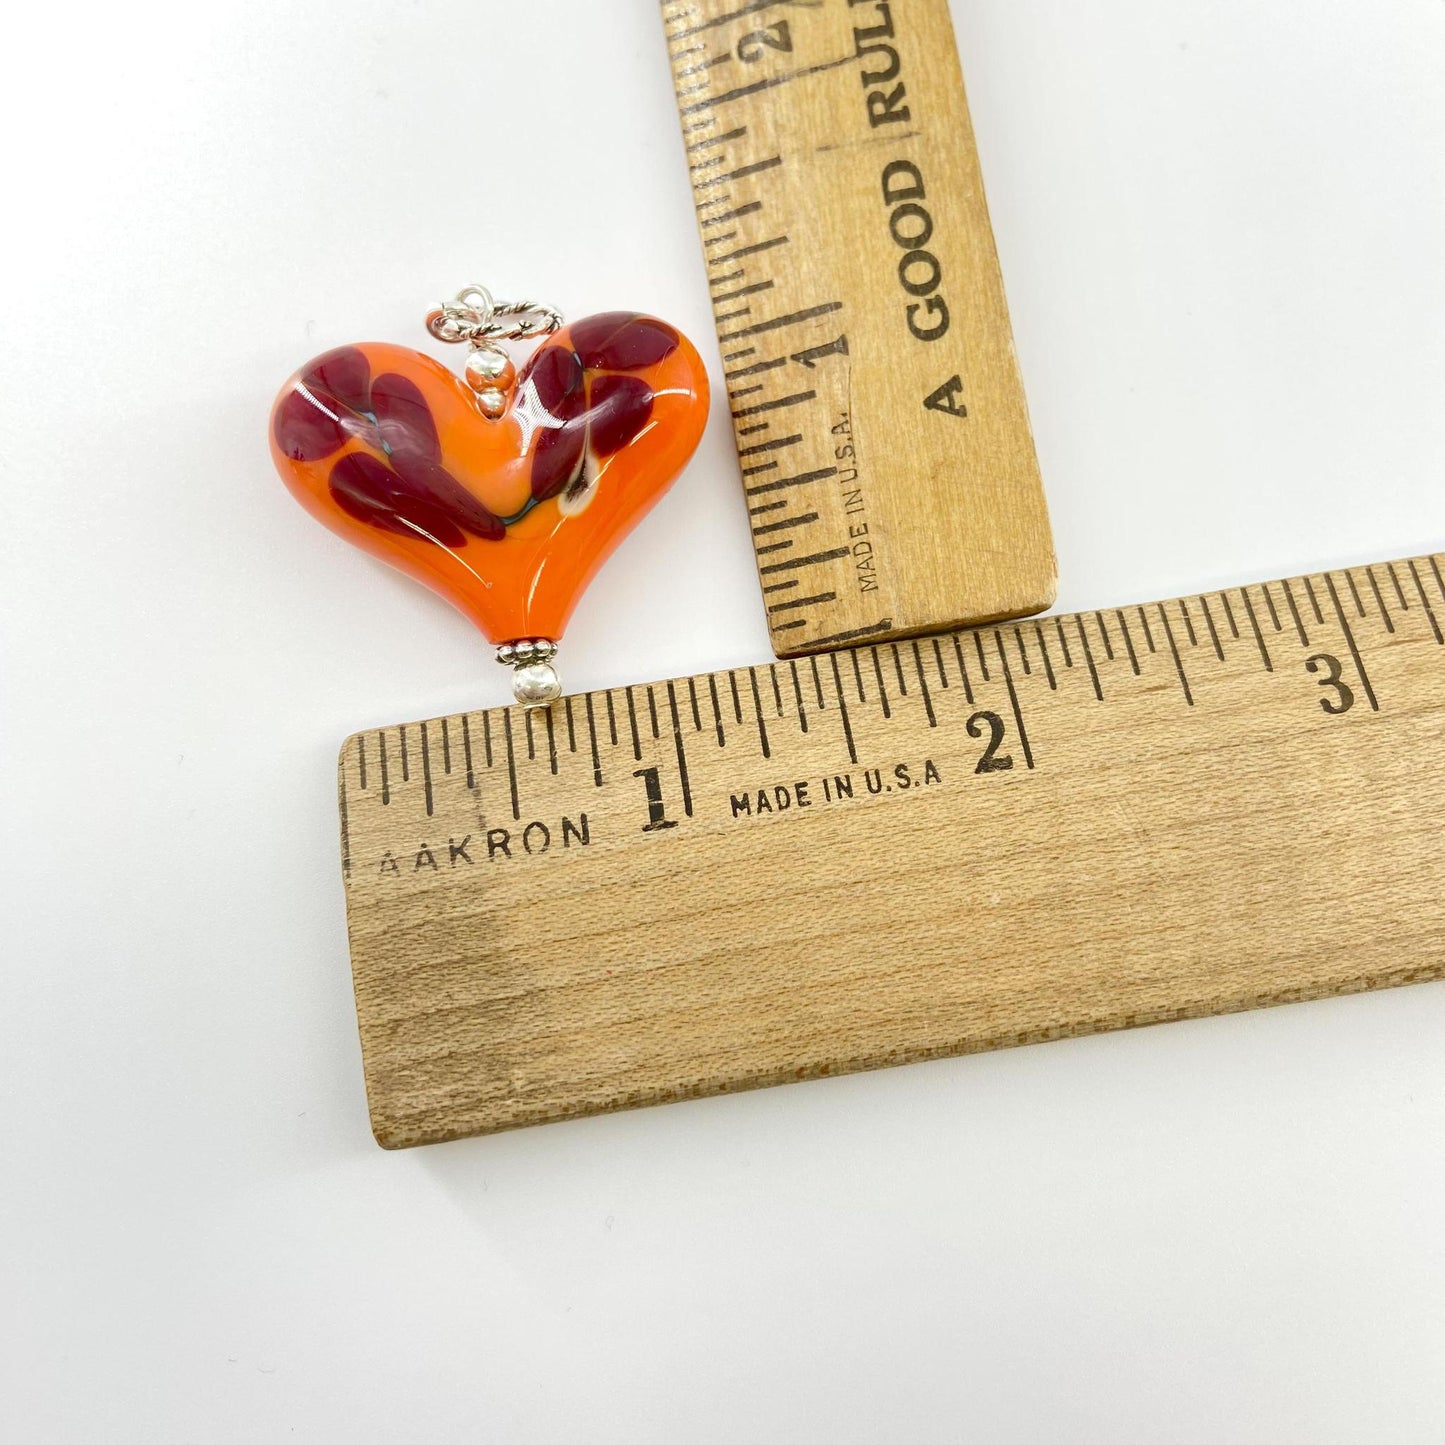 Pendant - Abstract Floral Heart - Red on Orange - Handmade Glass